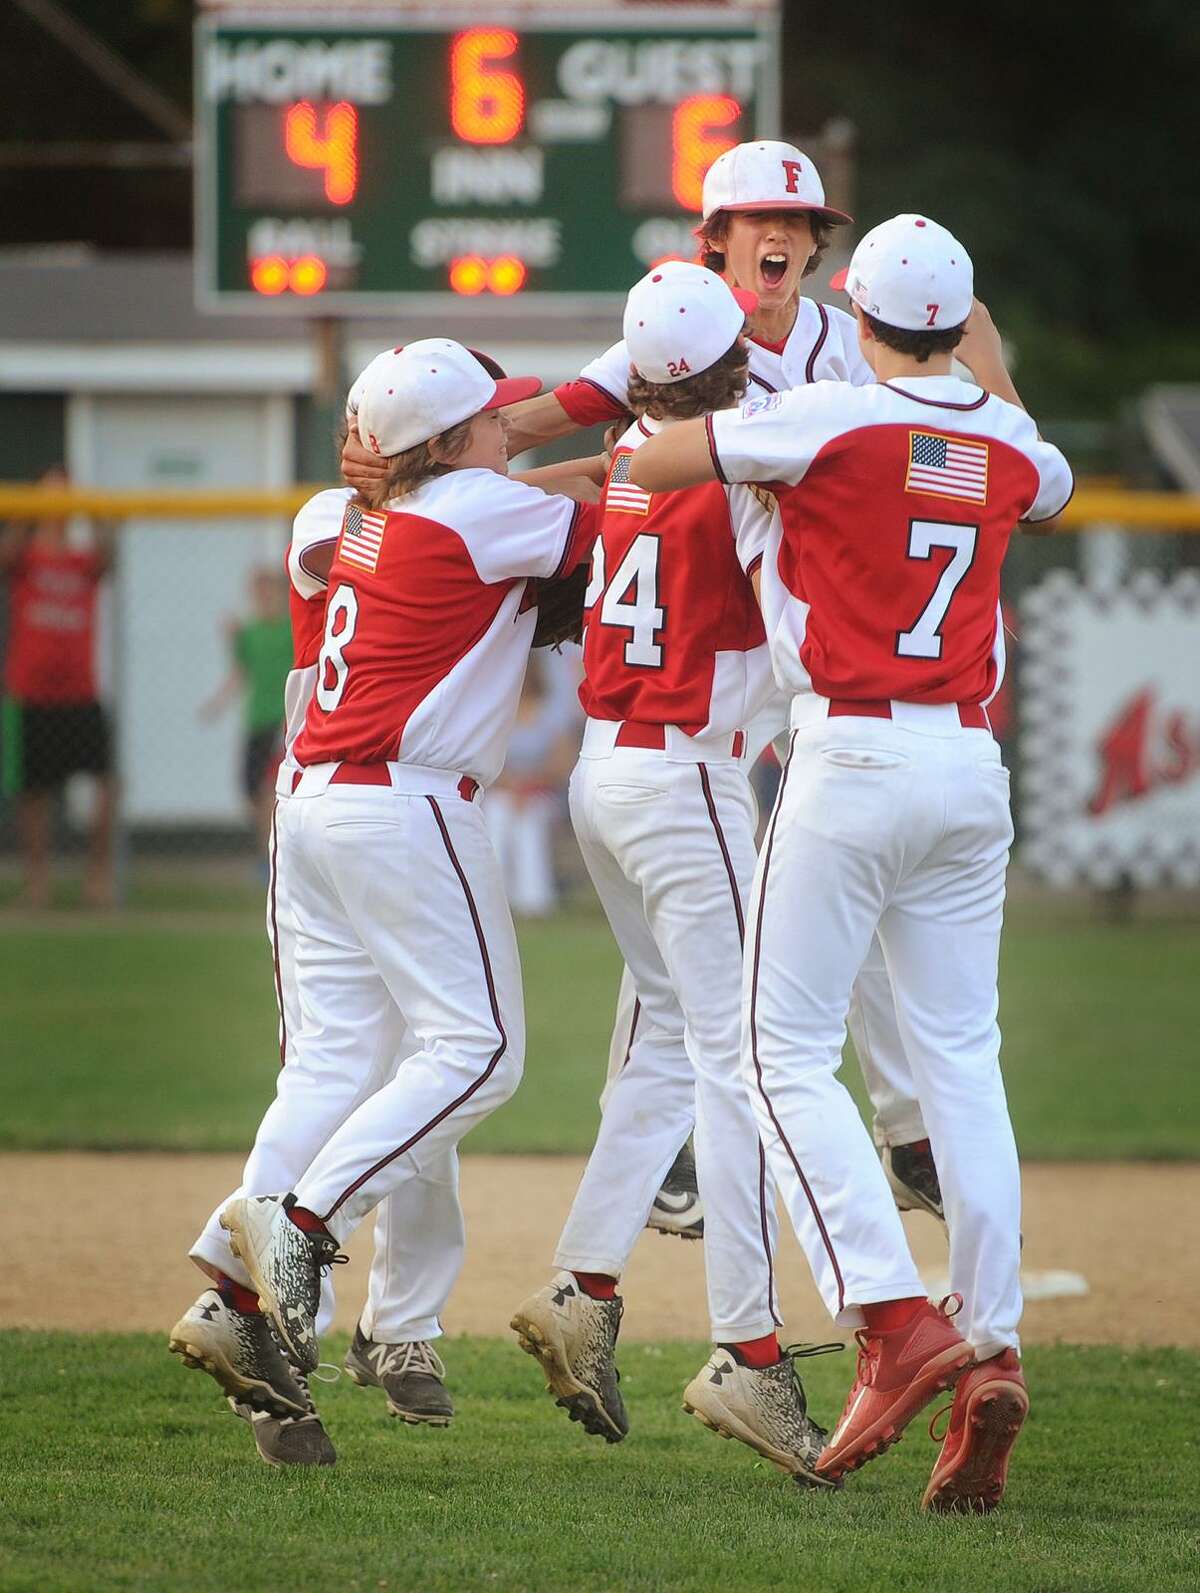 The Fairfield American baseball team celebrates their 6-4 victory over Newington in the Little League State Championship in Guilford, Conn. on Monday, July 31, 2017.